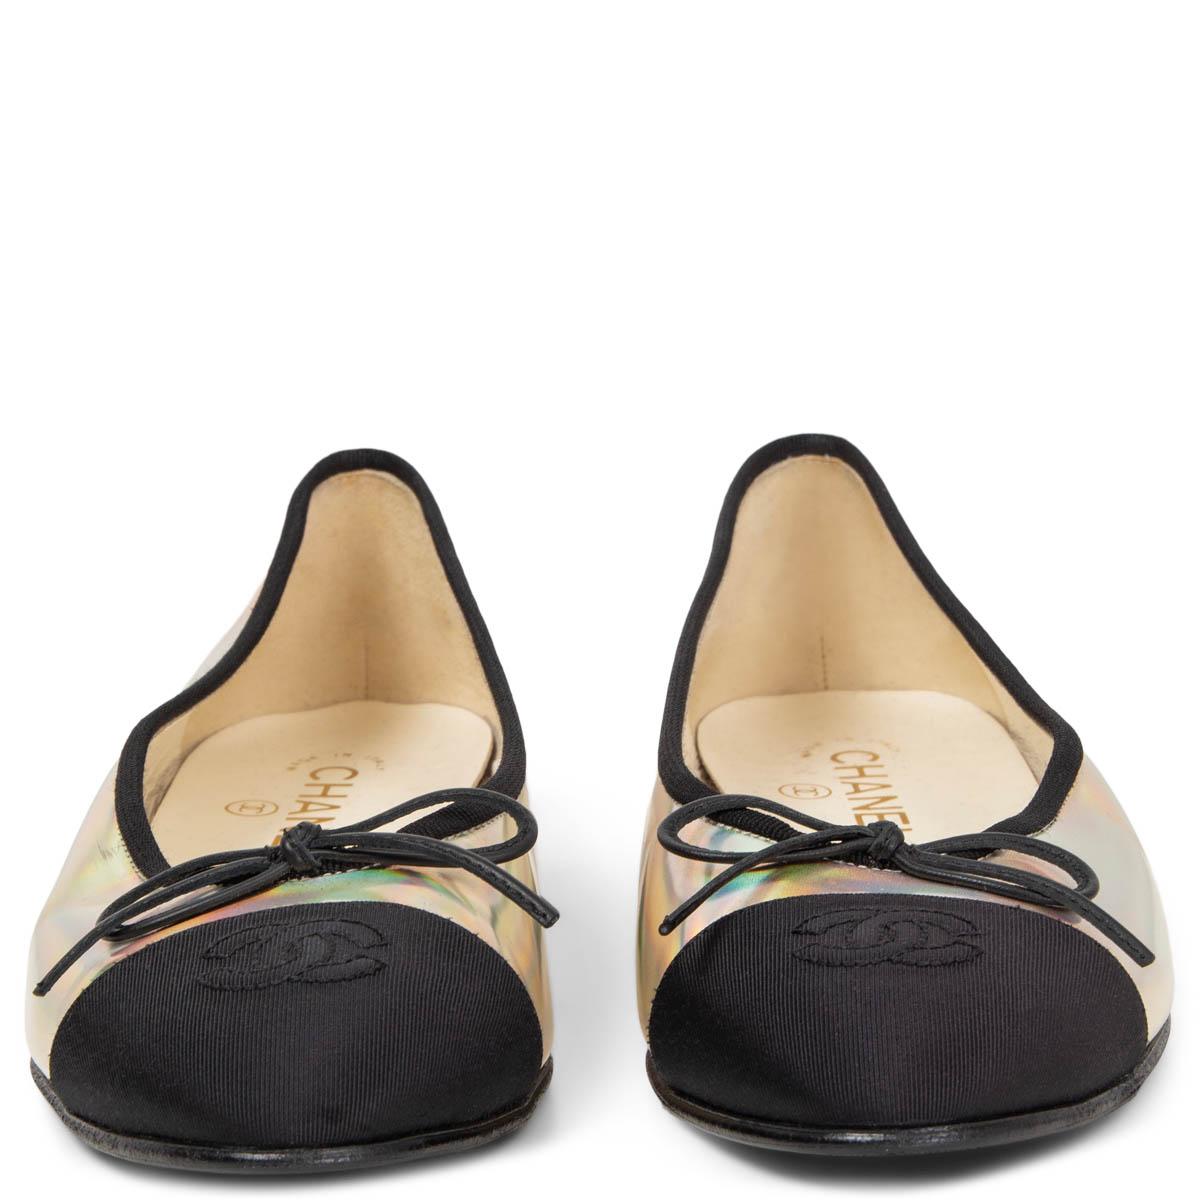 100% authentic Chanel classic ballet flats in iridescent rainbow with a black grosgrain tip and trimming. Spring-summer 2018 collection. Brand new with a small scratch on the right shoe. Come with dust bag. Rubber sole got added.